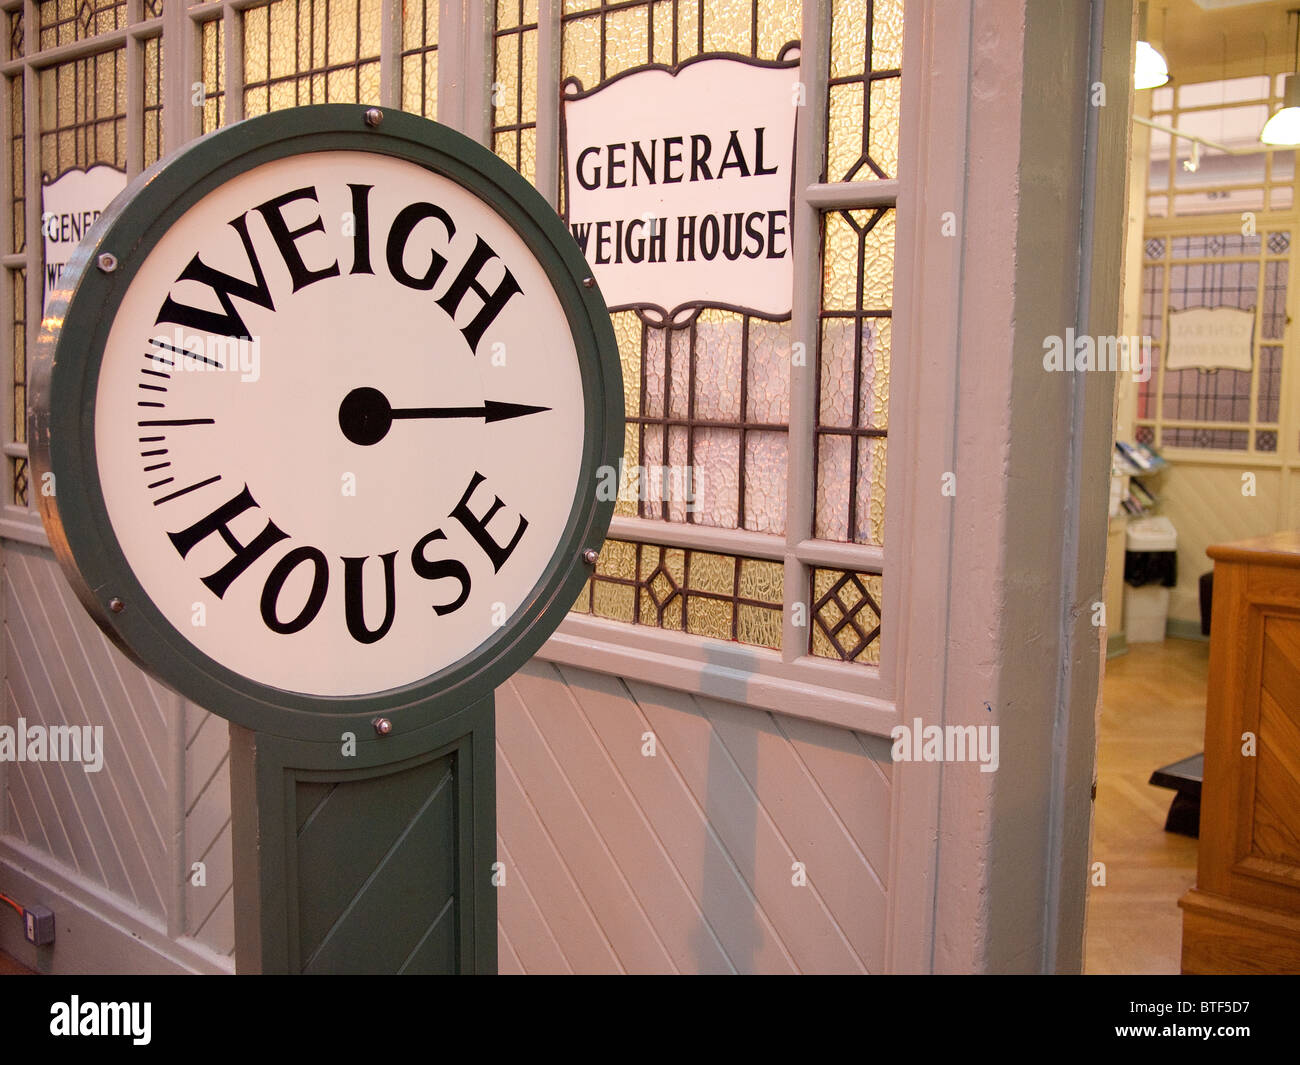 The General Weigh House, Grainger Market, Newcastle Stock Photo